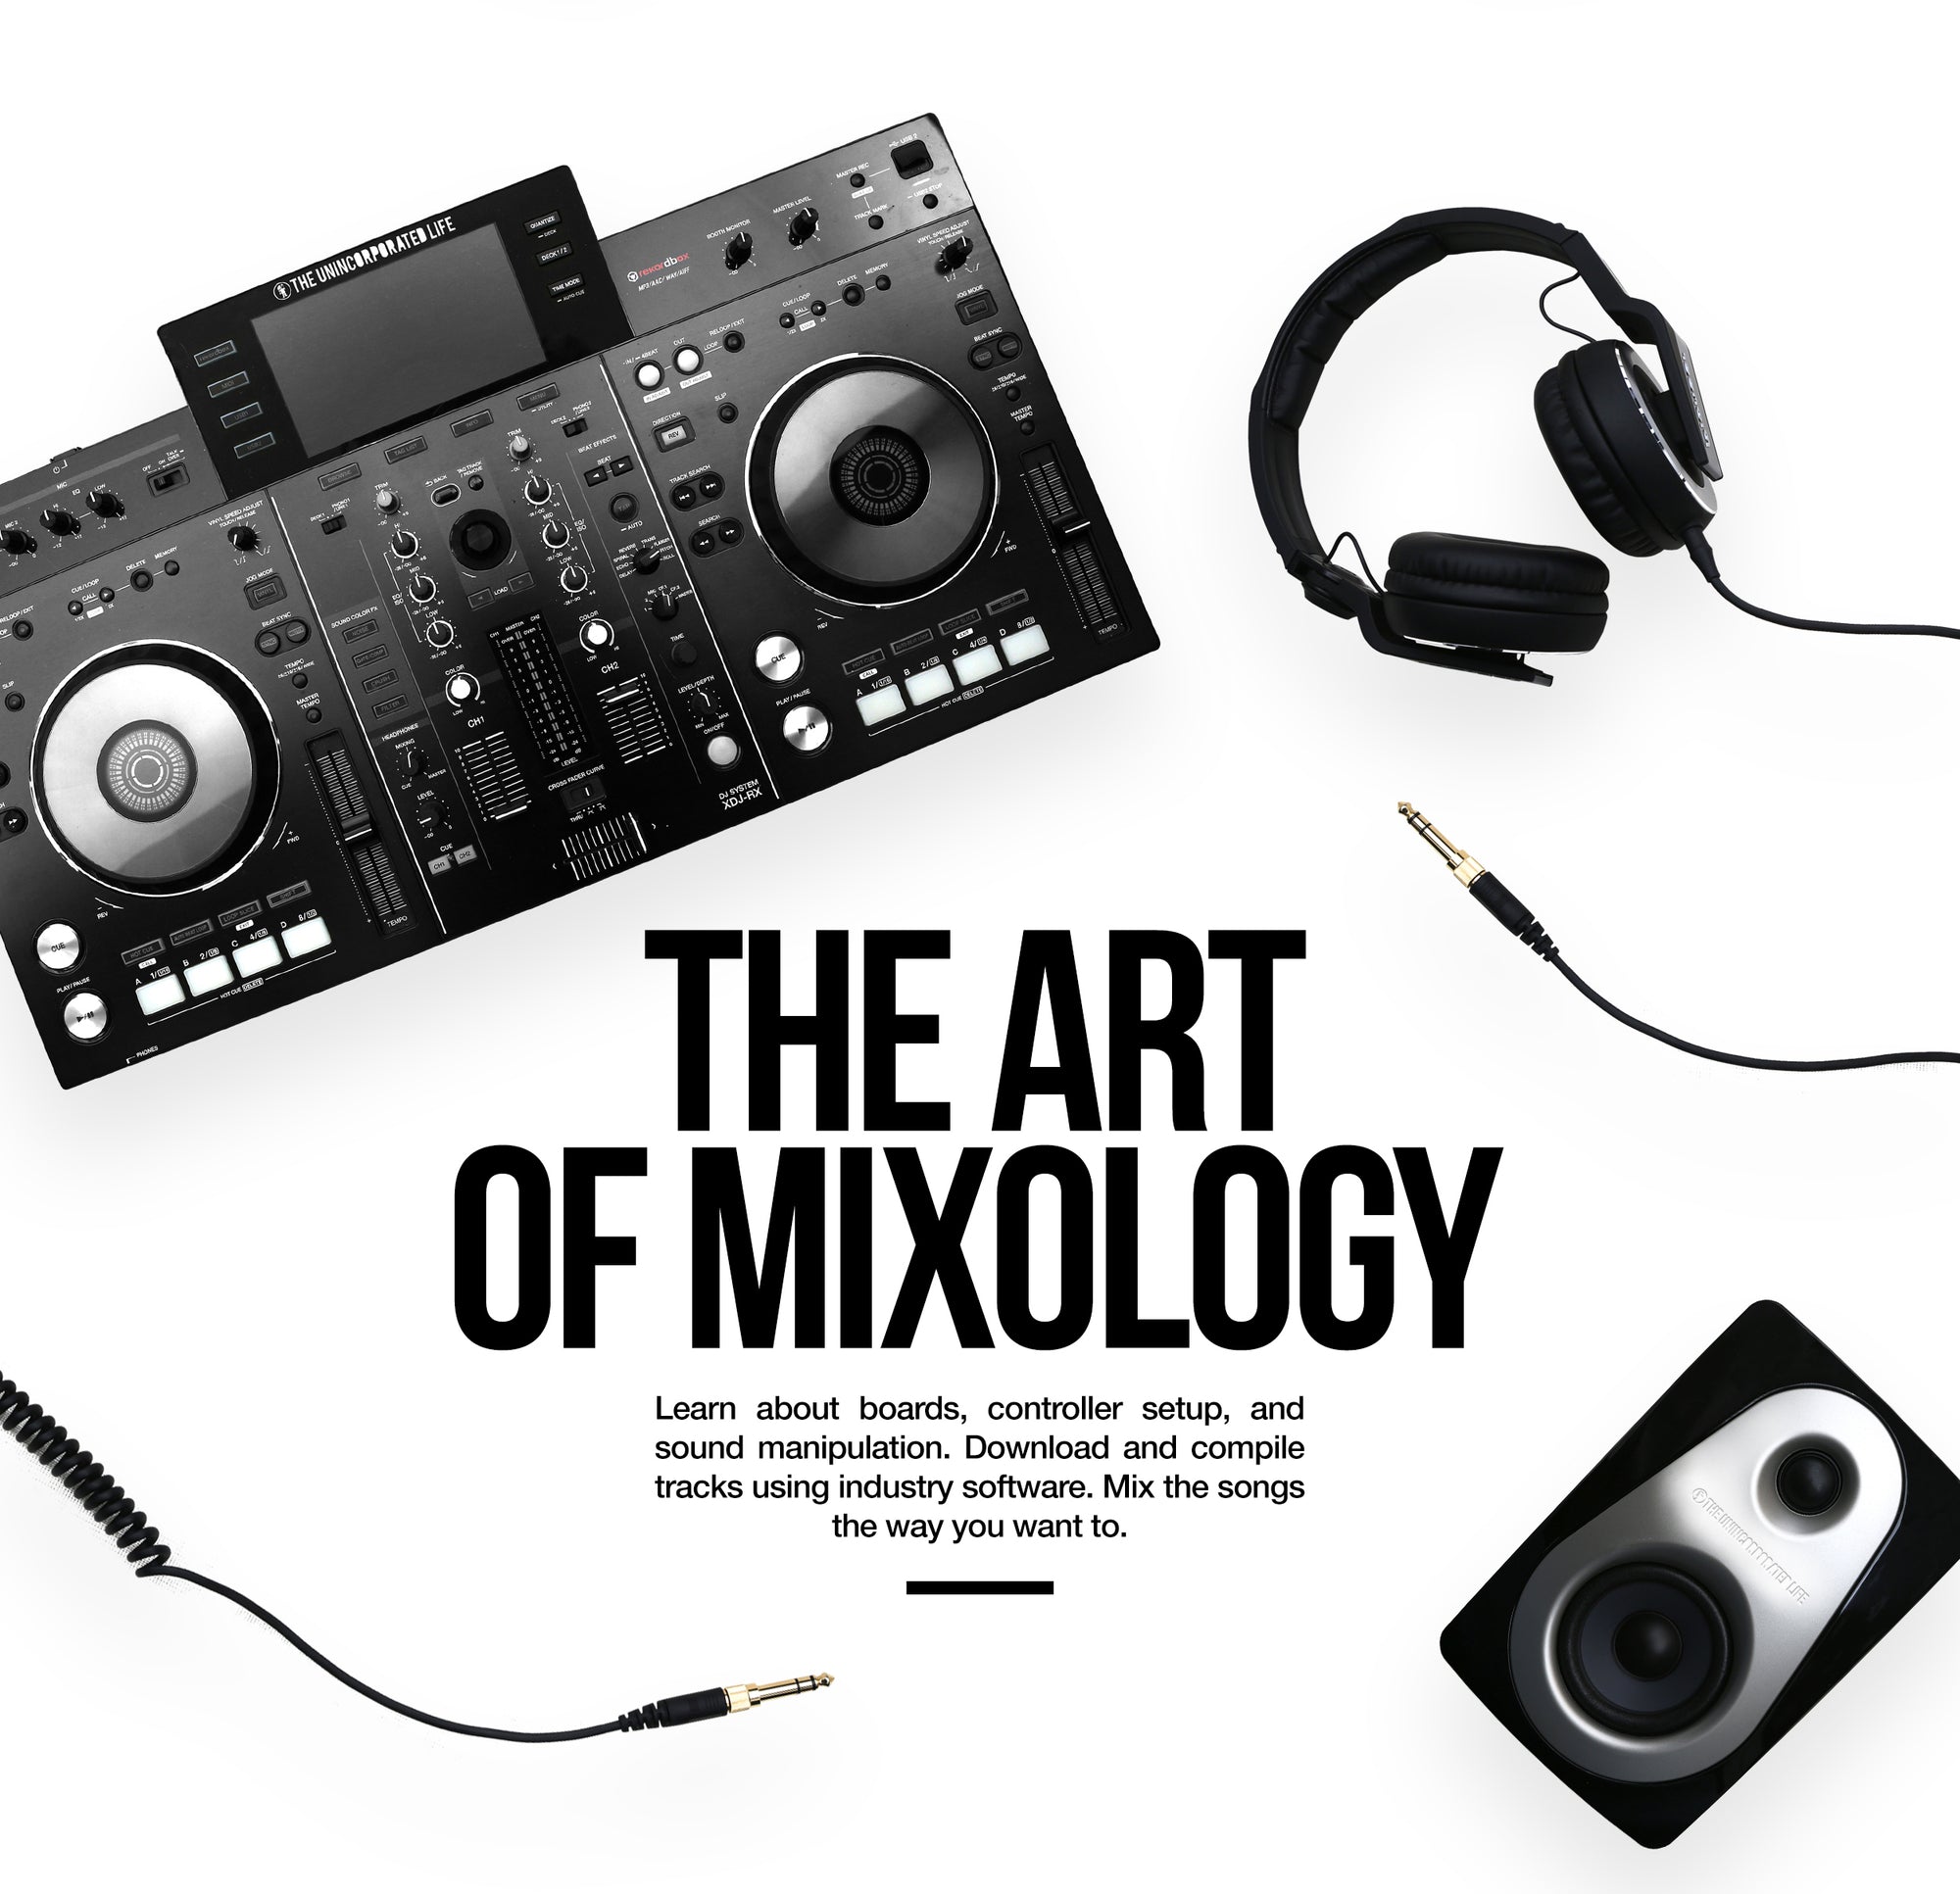 The Art of Mixology Learn about boards, controller setup, and sound manipulation. Download and compile tracks using industry software. Mix the songs the way you want to.